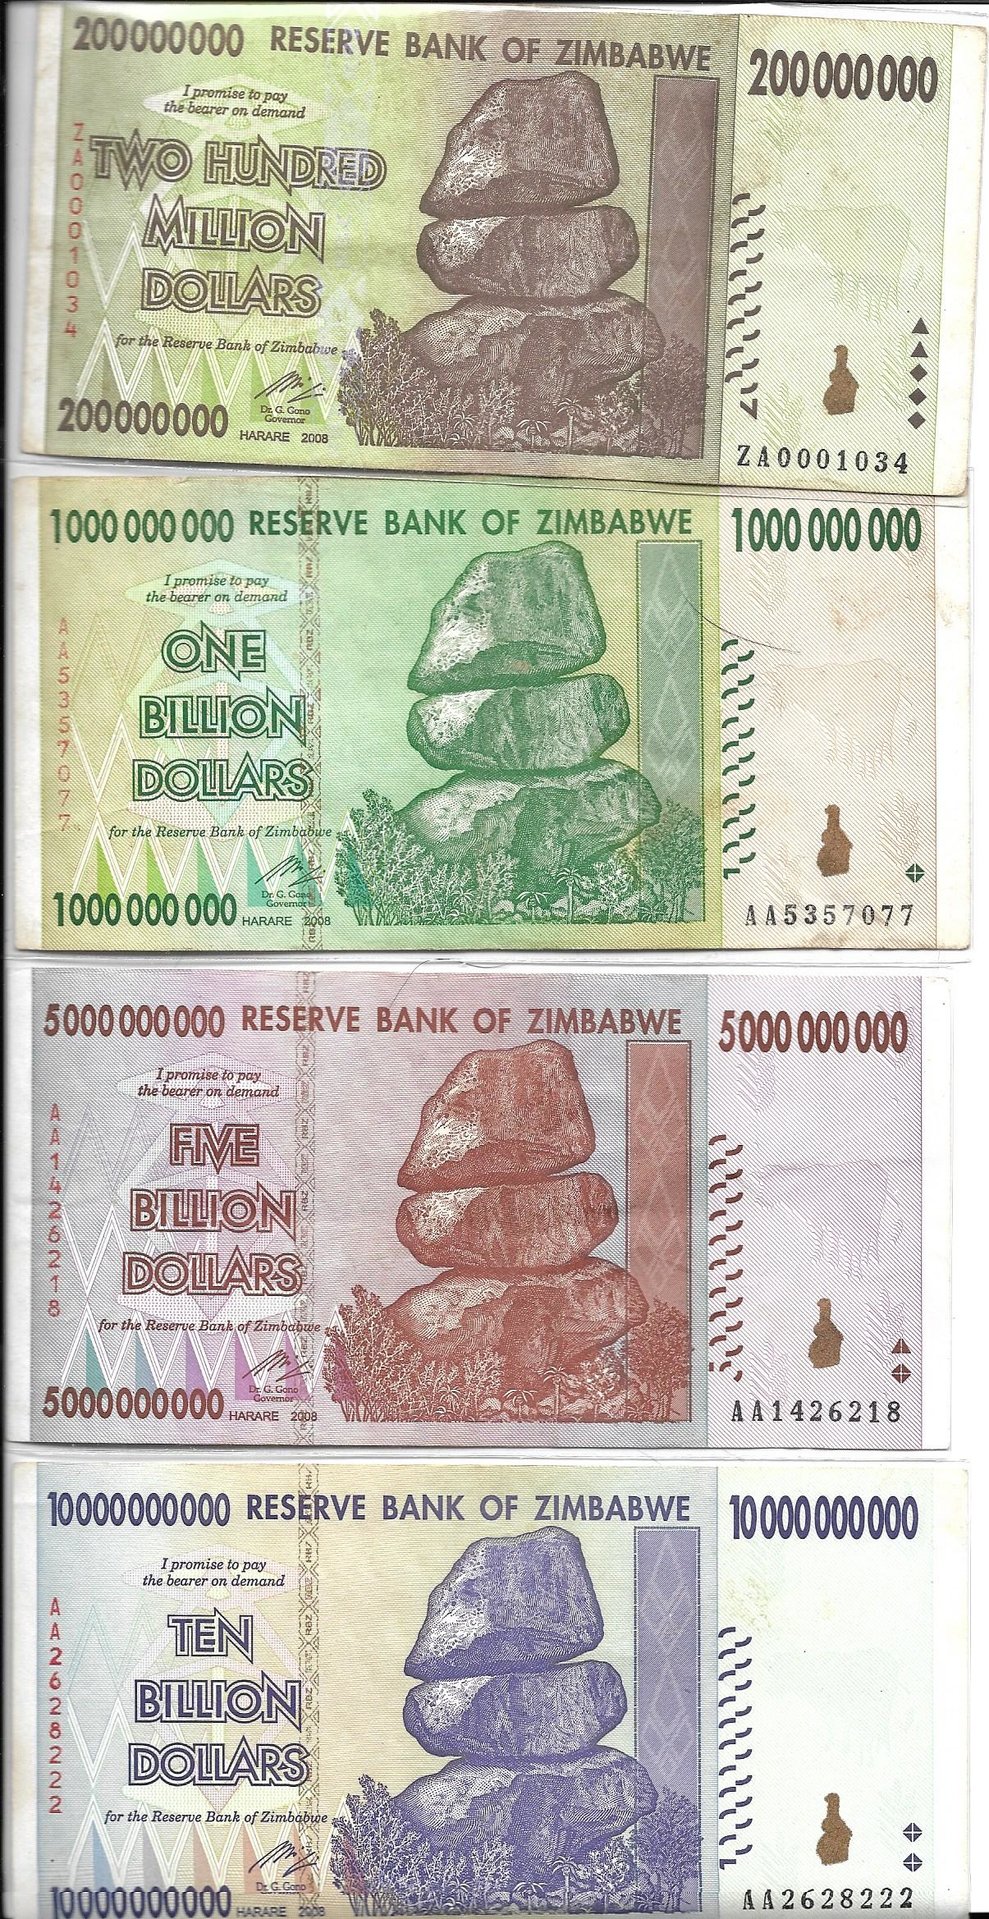 The Infamous Zimbabwean 100 Trillion Dollar Bill Page 2